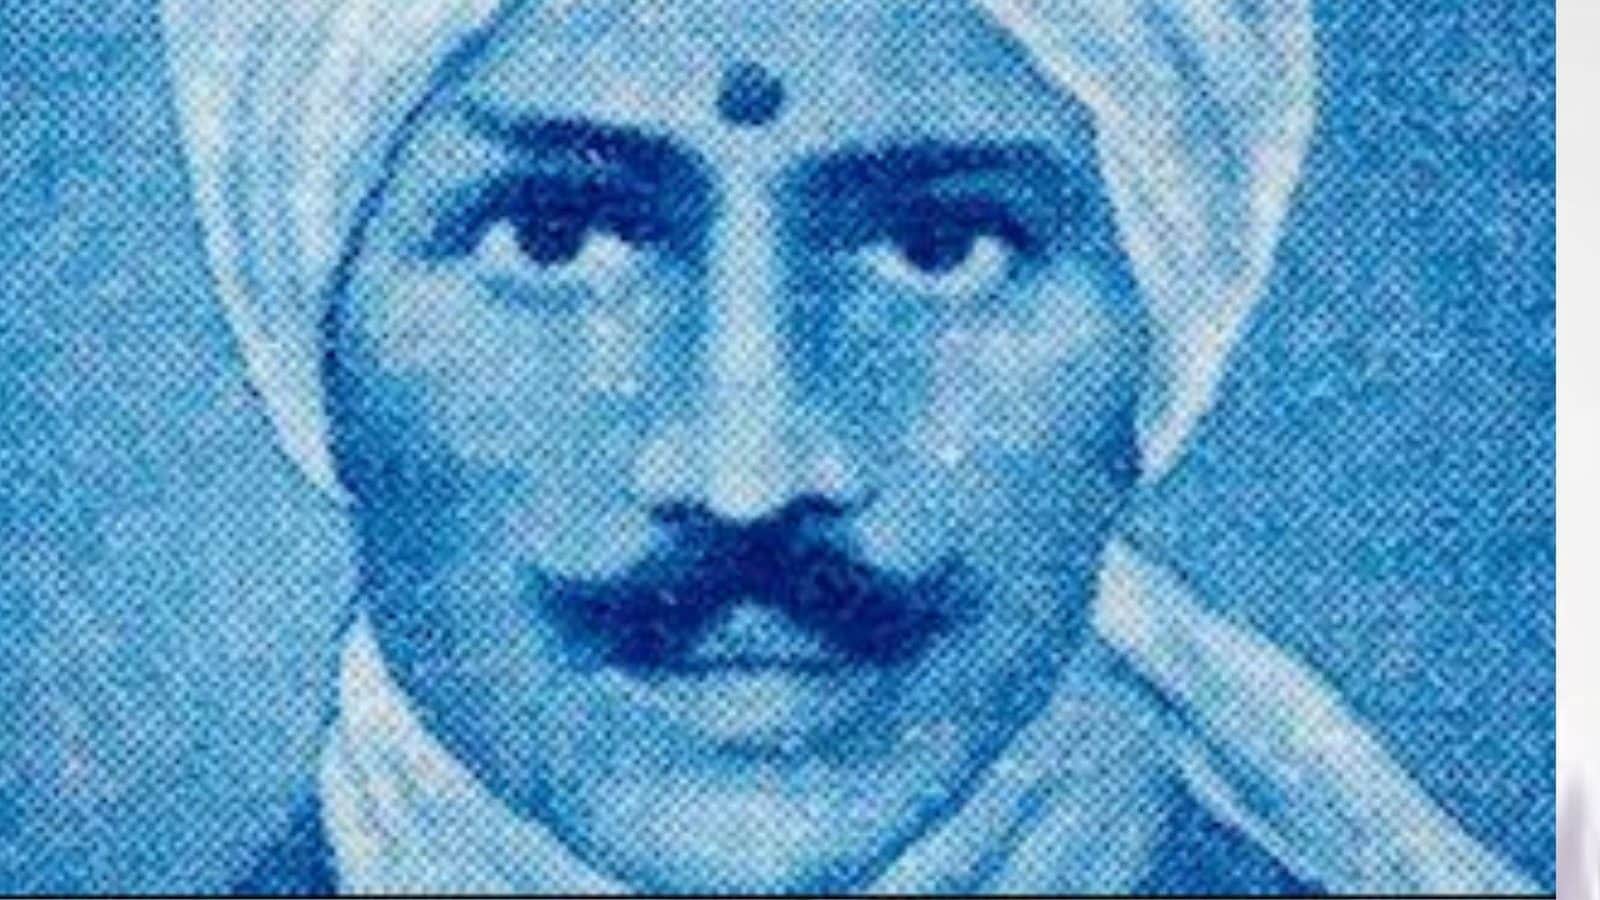 From Hindi, Sanskrit to French, Tamil Poet Subramania Bharati Liked Language in All Its Varieties